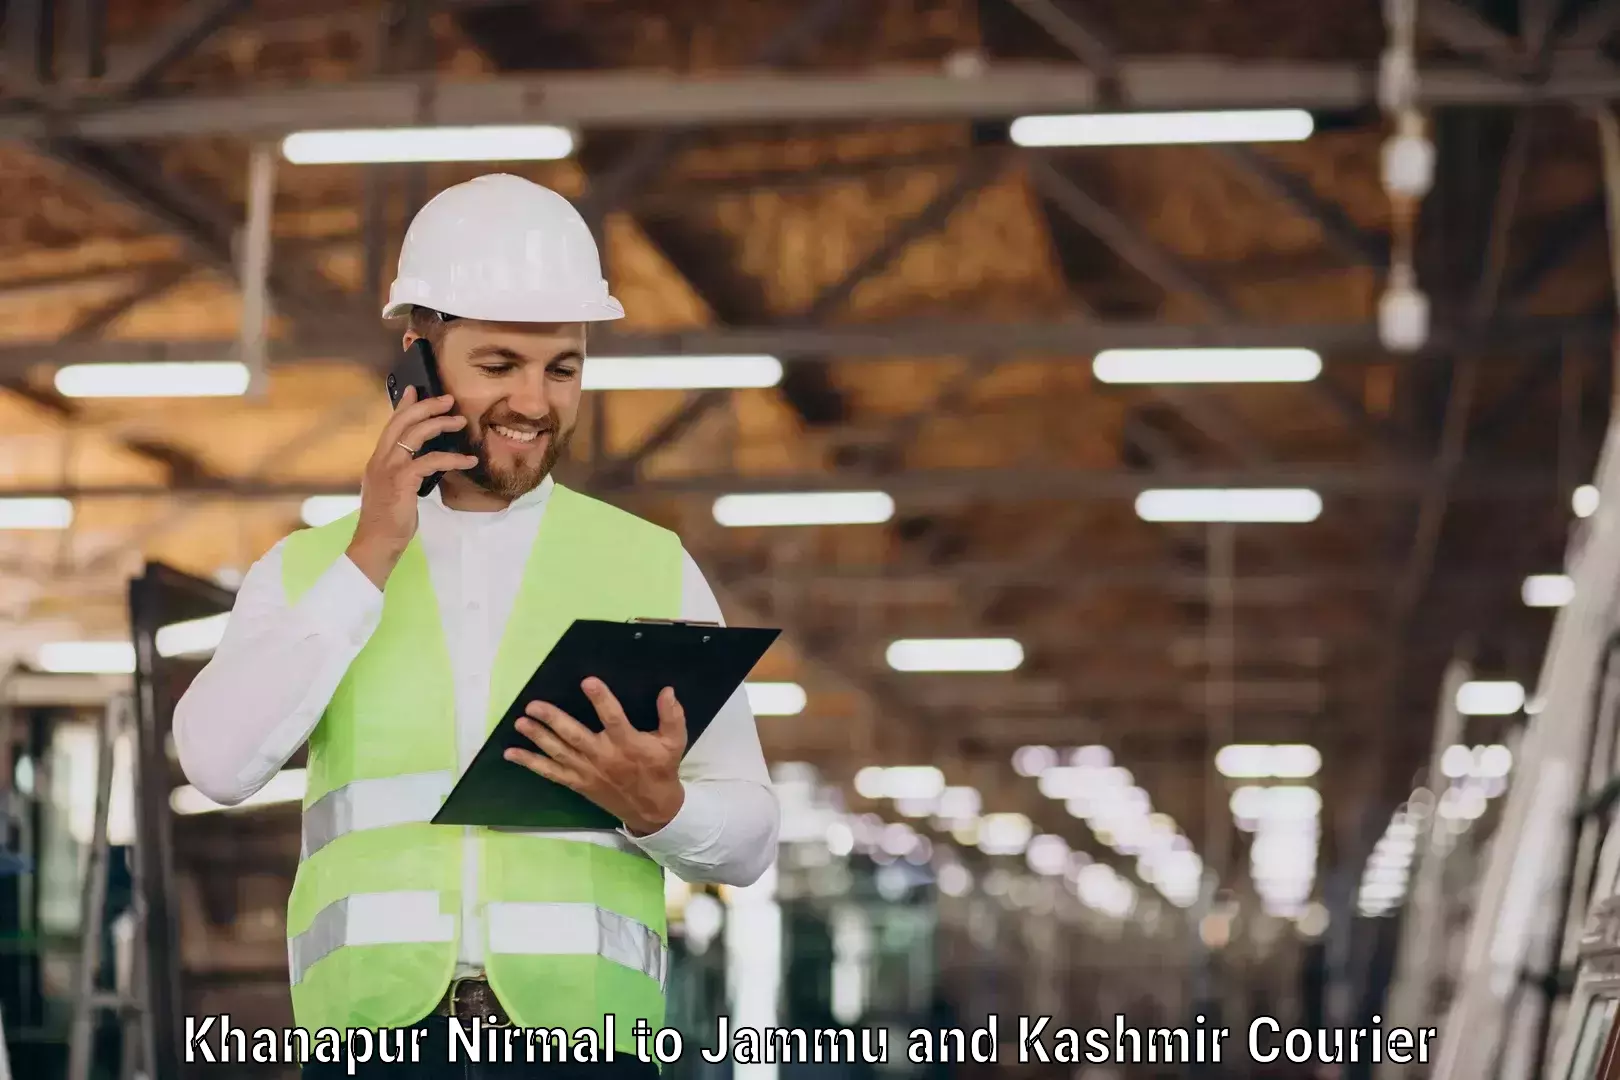 Full-service courier options in Khanapur Nirmal to Shopian